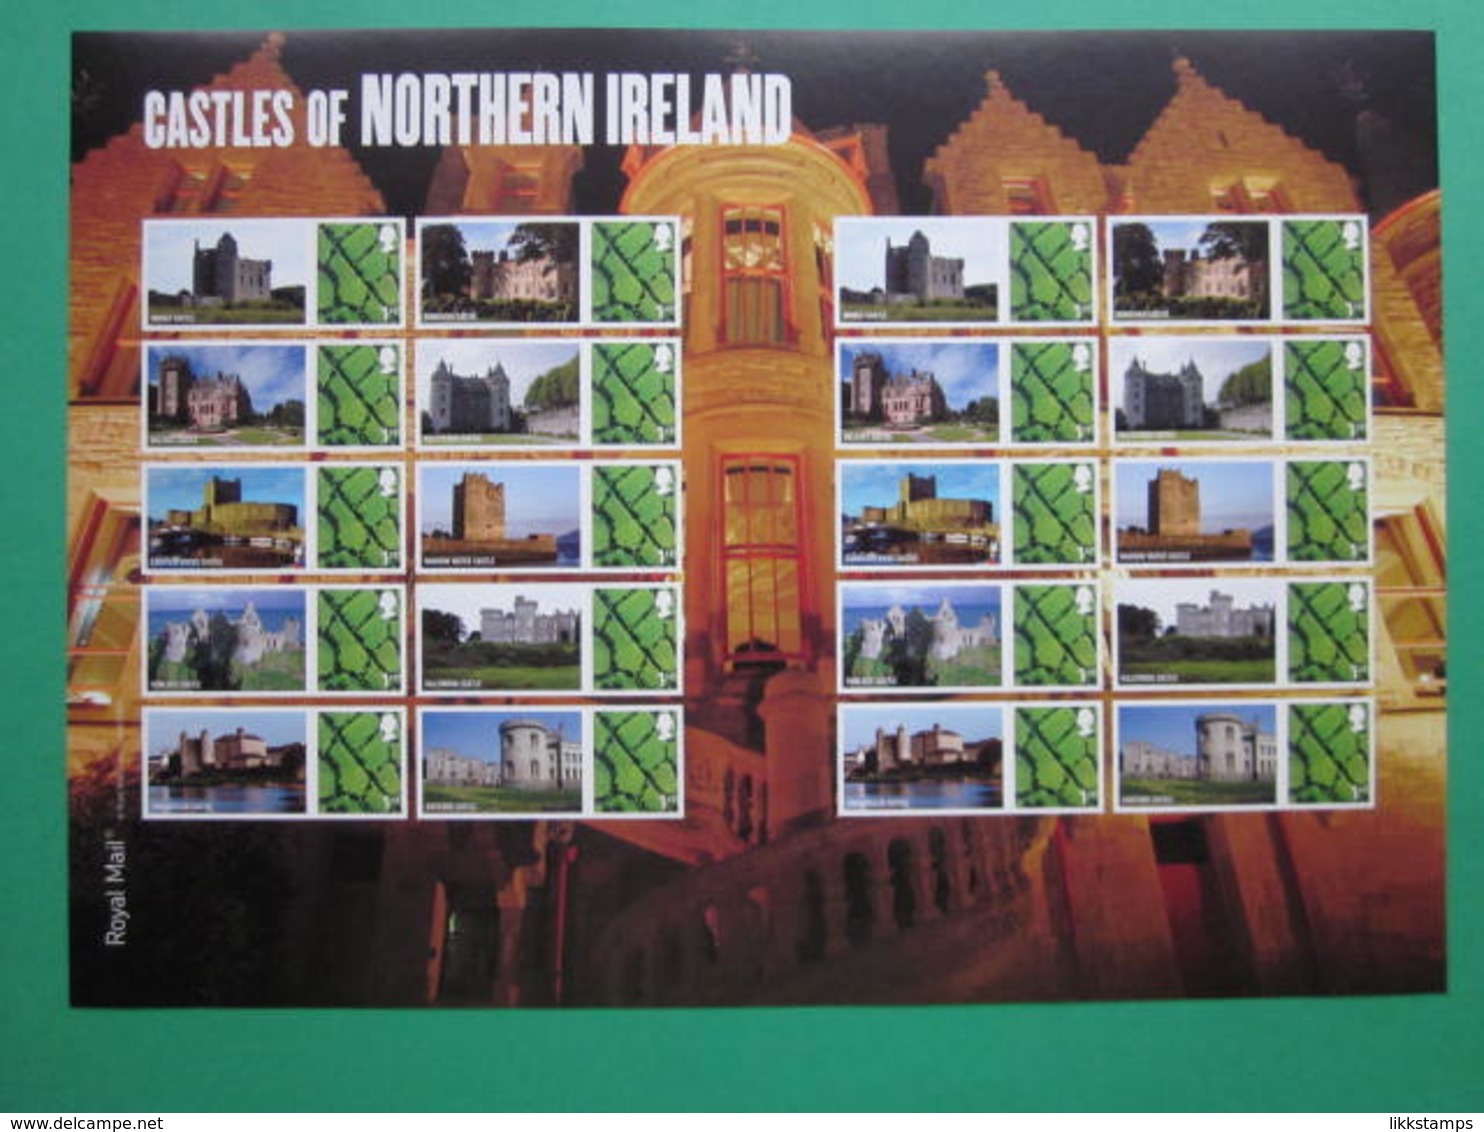 2009 ROYAL MAIL CASTLES OF NORTHERN IRELAND GENERIC SMILERS SHEET. #SS0060 - Smilers Sheets